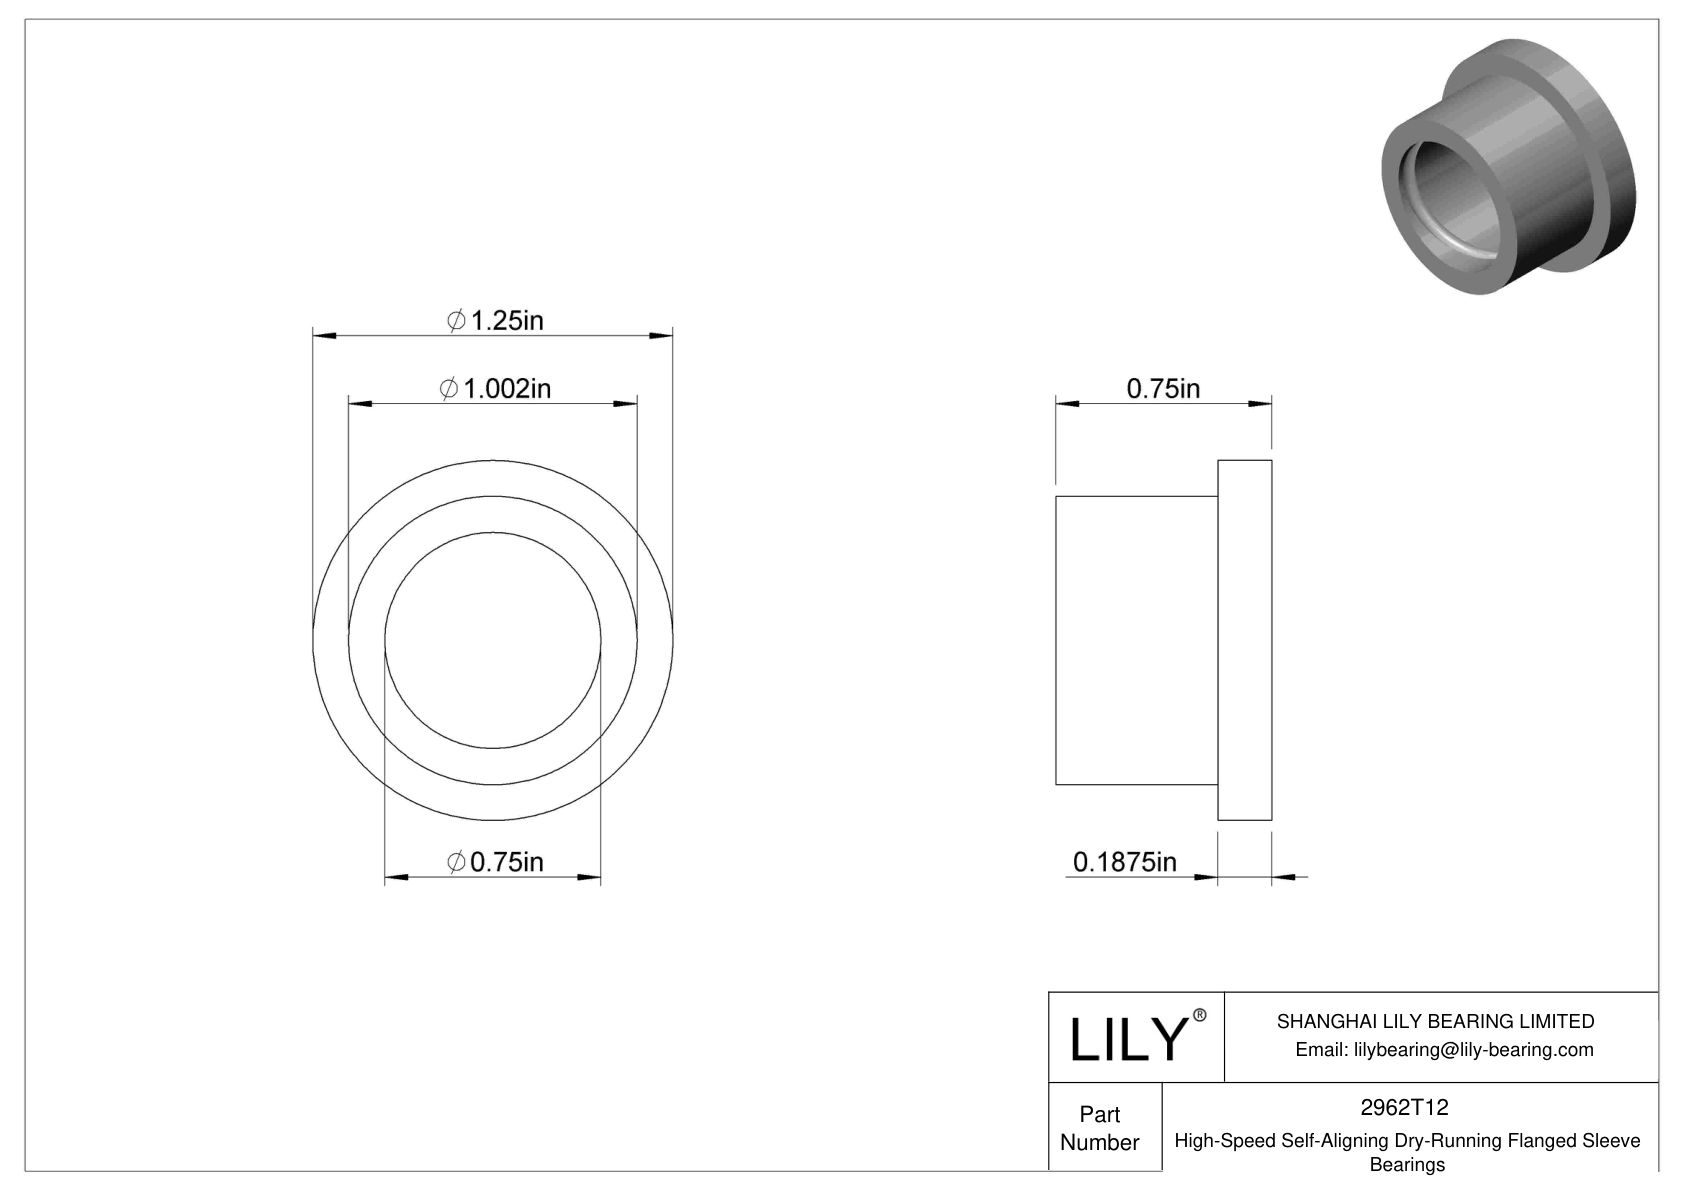 CJGCTBC High-Temperature Dry-Running Flanged Sleeve Bearings cad drawing